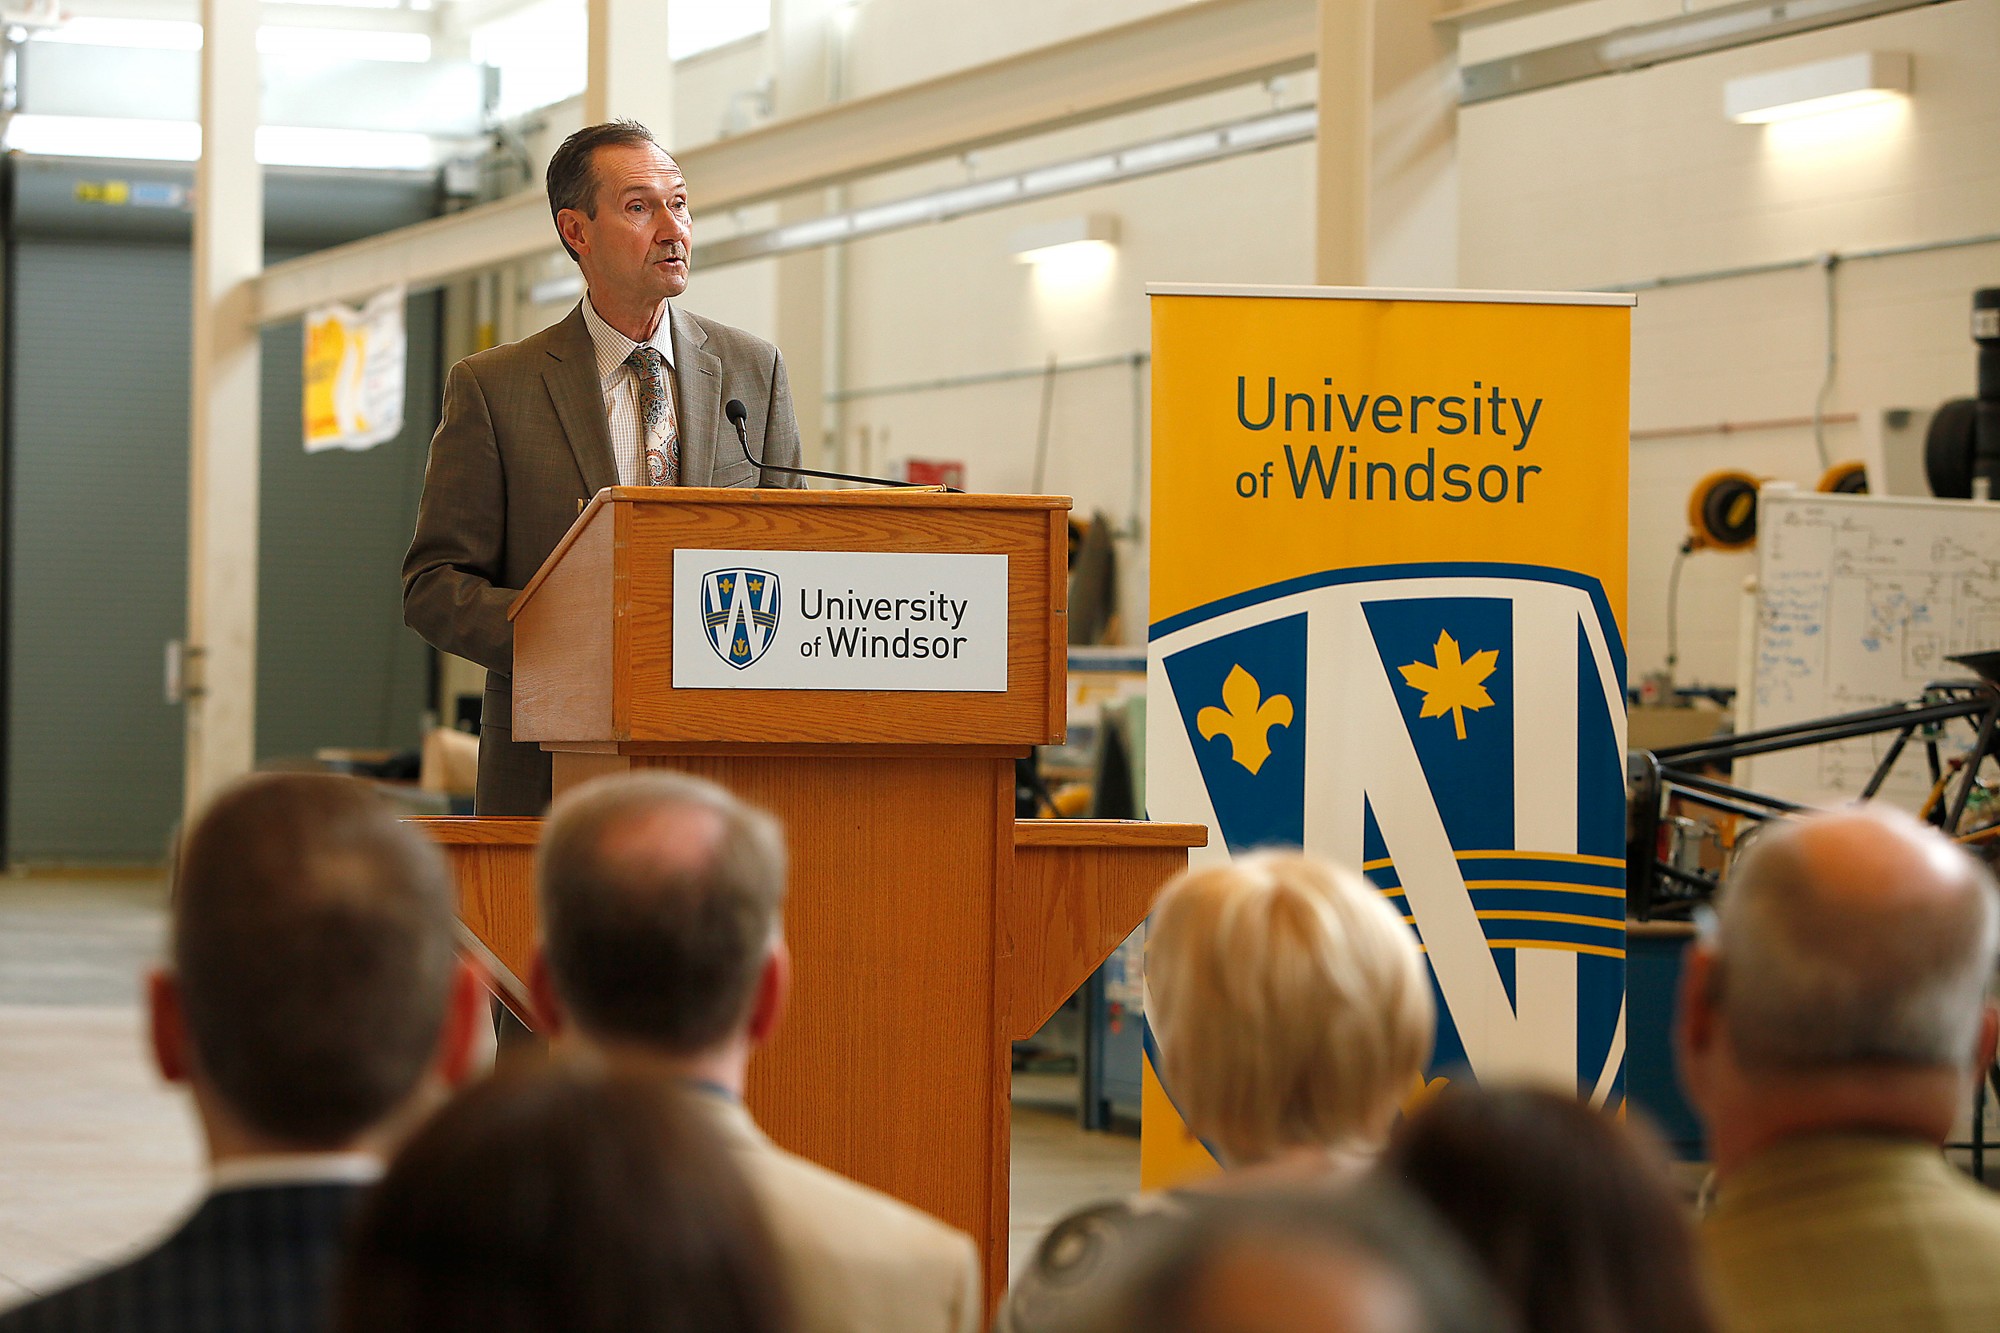 Keith Henry (R), president and CEO of the Windsor Mold Group giving speech.